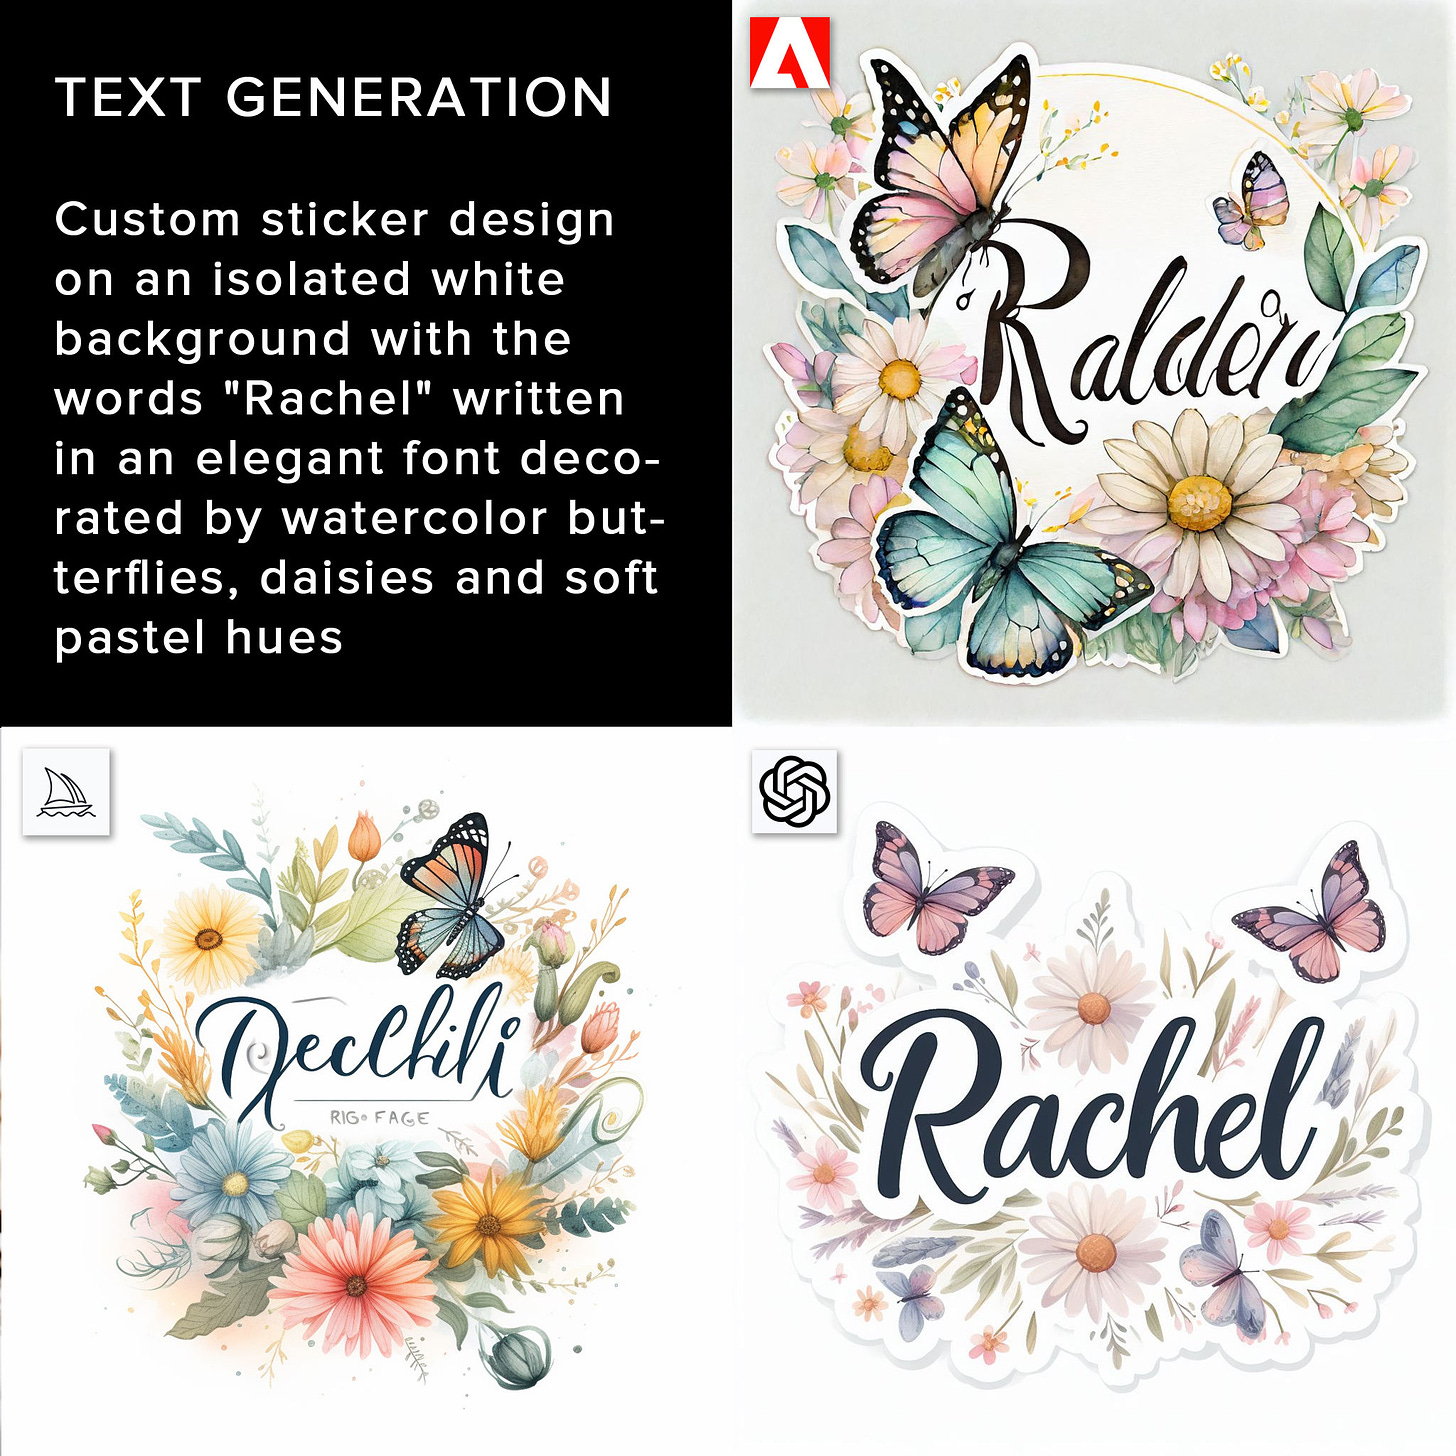 Grid of three images created by each of the tools, all are illustrations with flowers and butterflies and attempts to add the name Rachel. Only Dall-E3 succeeds. Text reads - Custom sticker design on an isolated white background with the words "Rachel" written in an elegant font decorated by watercolor butterflies, daisies and soft hues